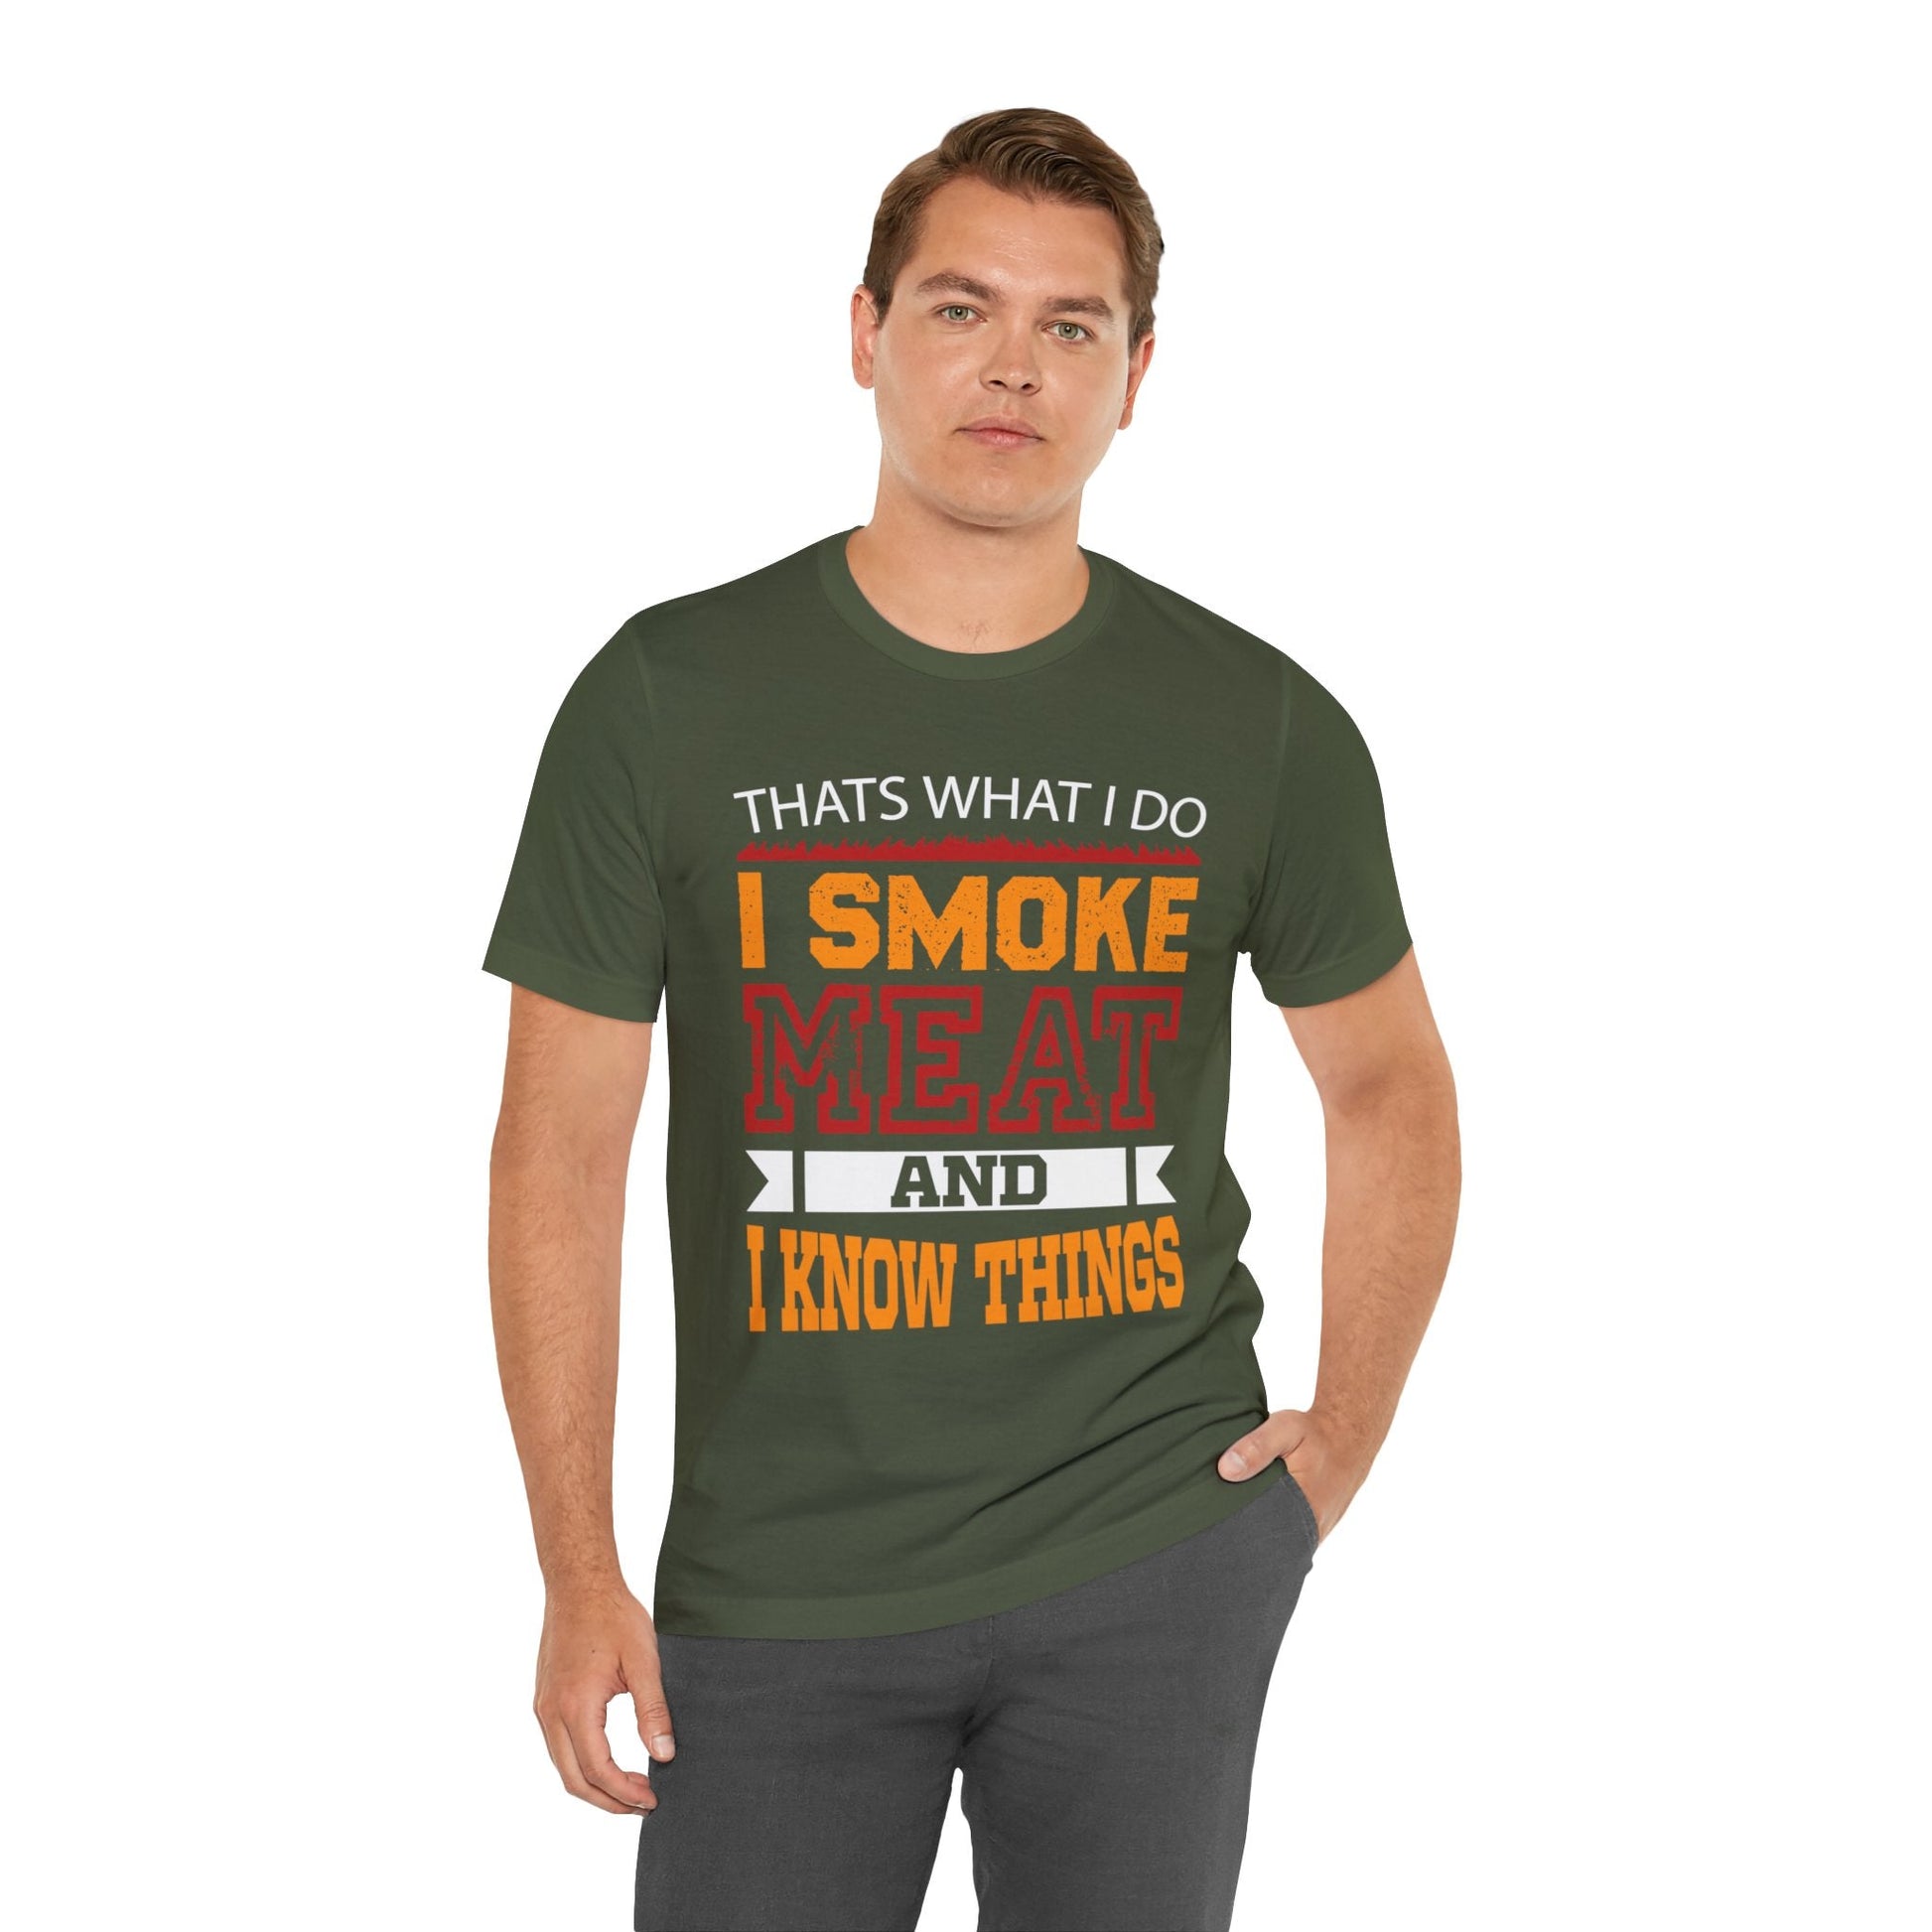 That what i do T - Shirt - The Cavemanstyle